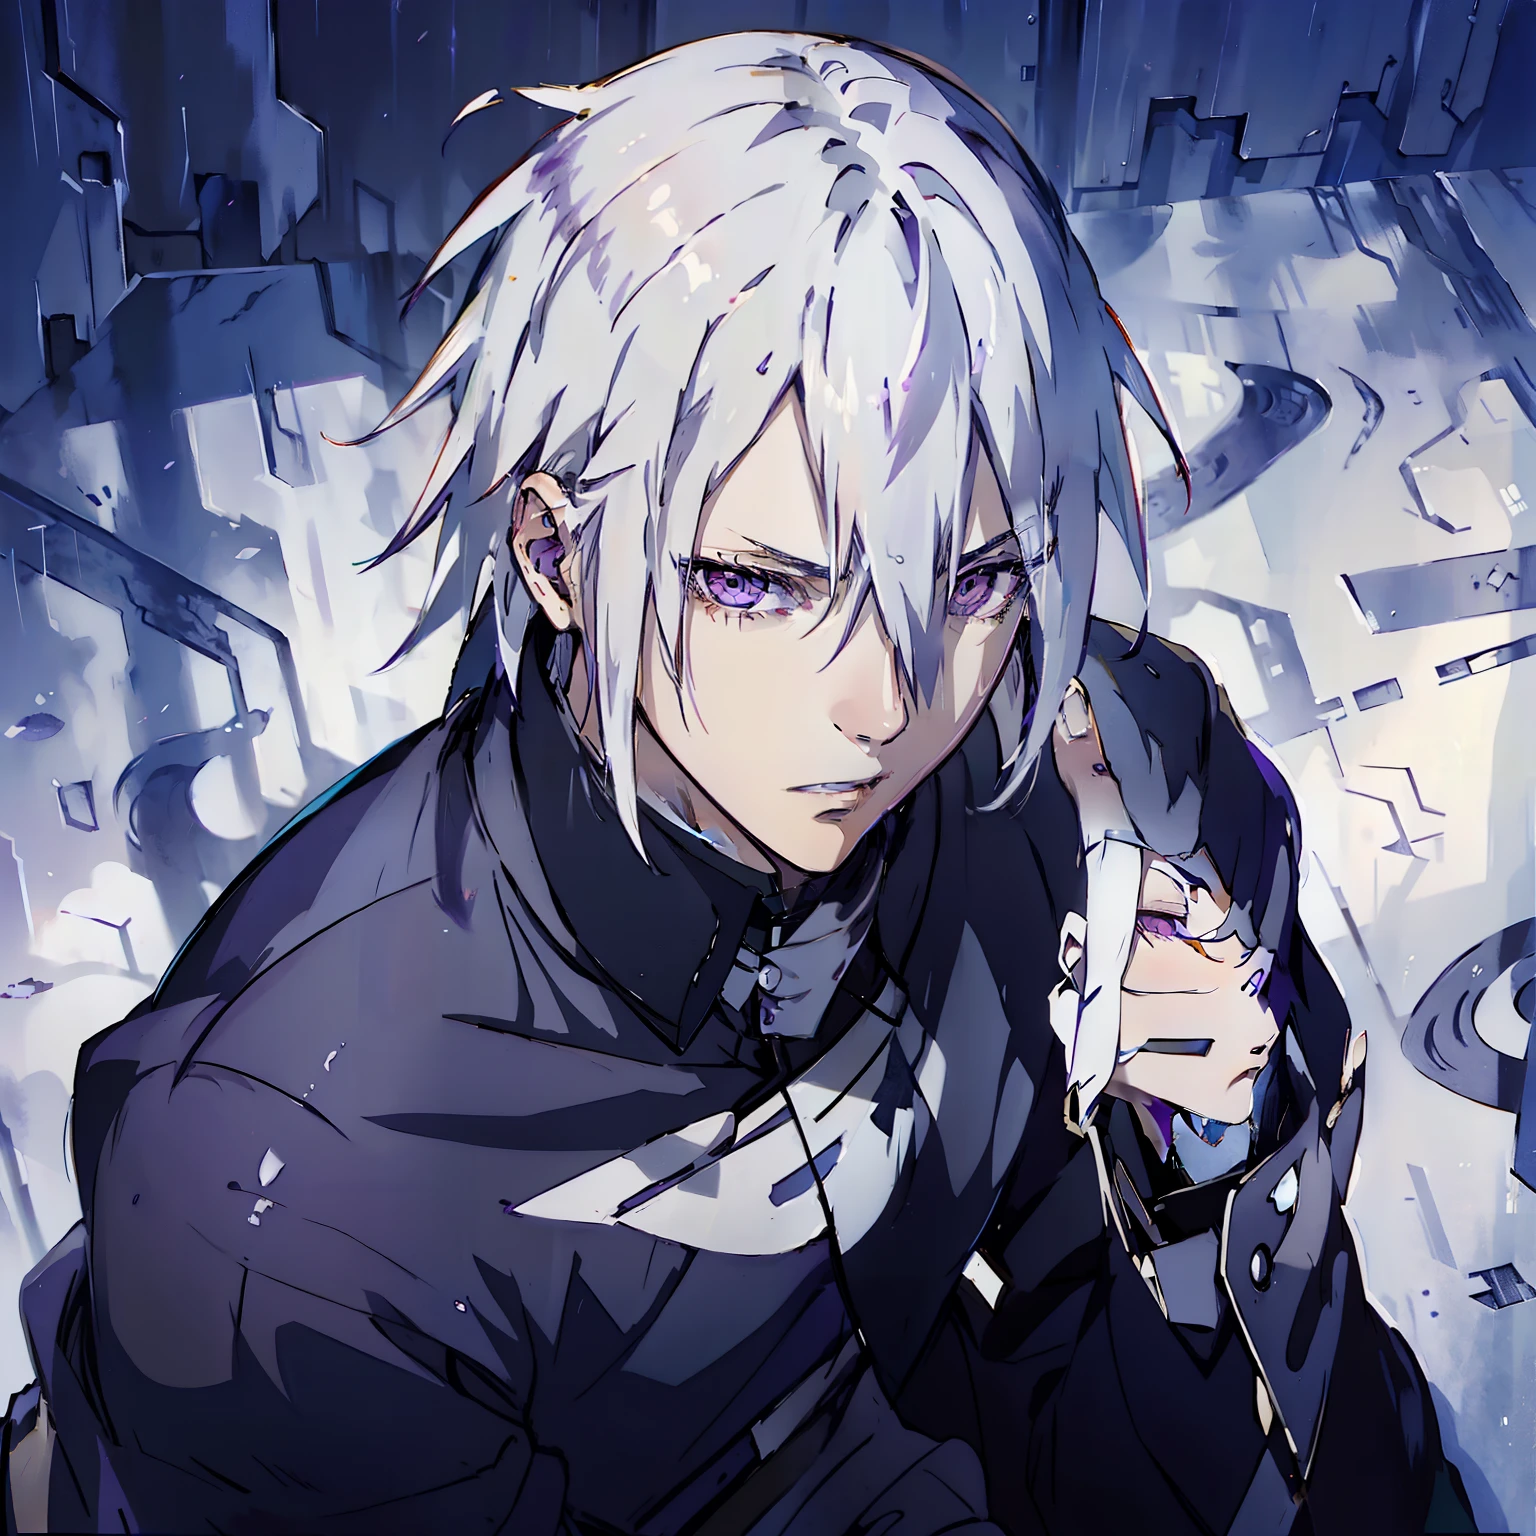 Boy with white hair and purple eyes